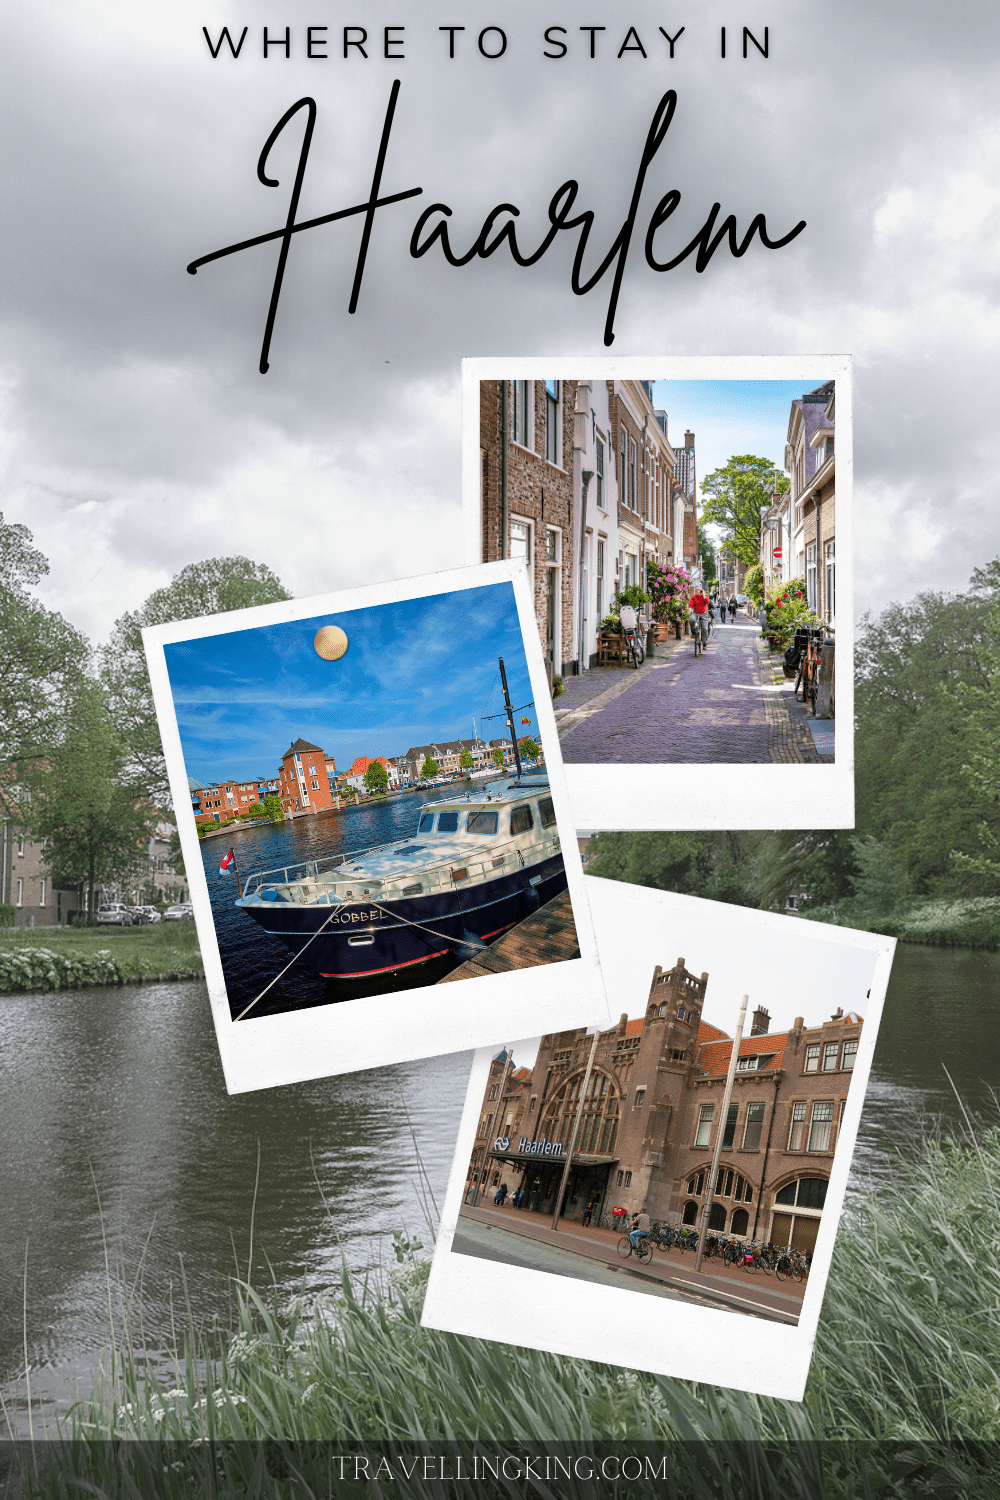 Where to stay in Haarlem